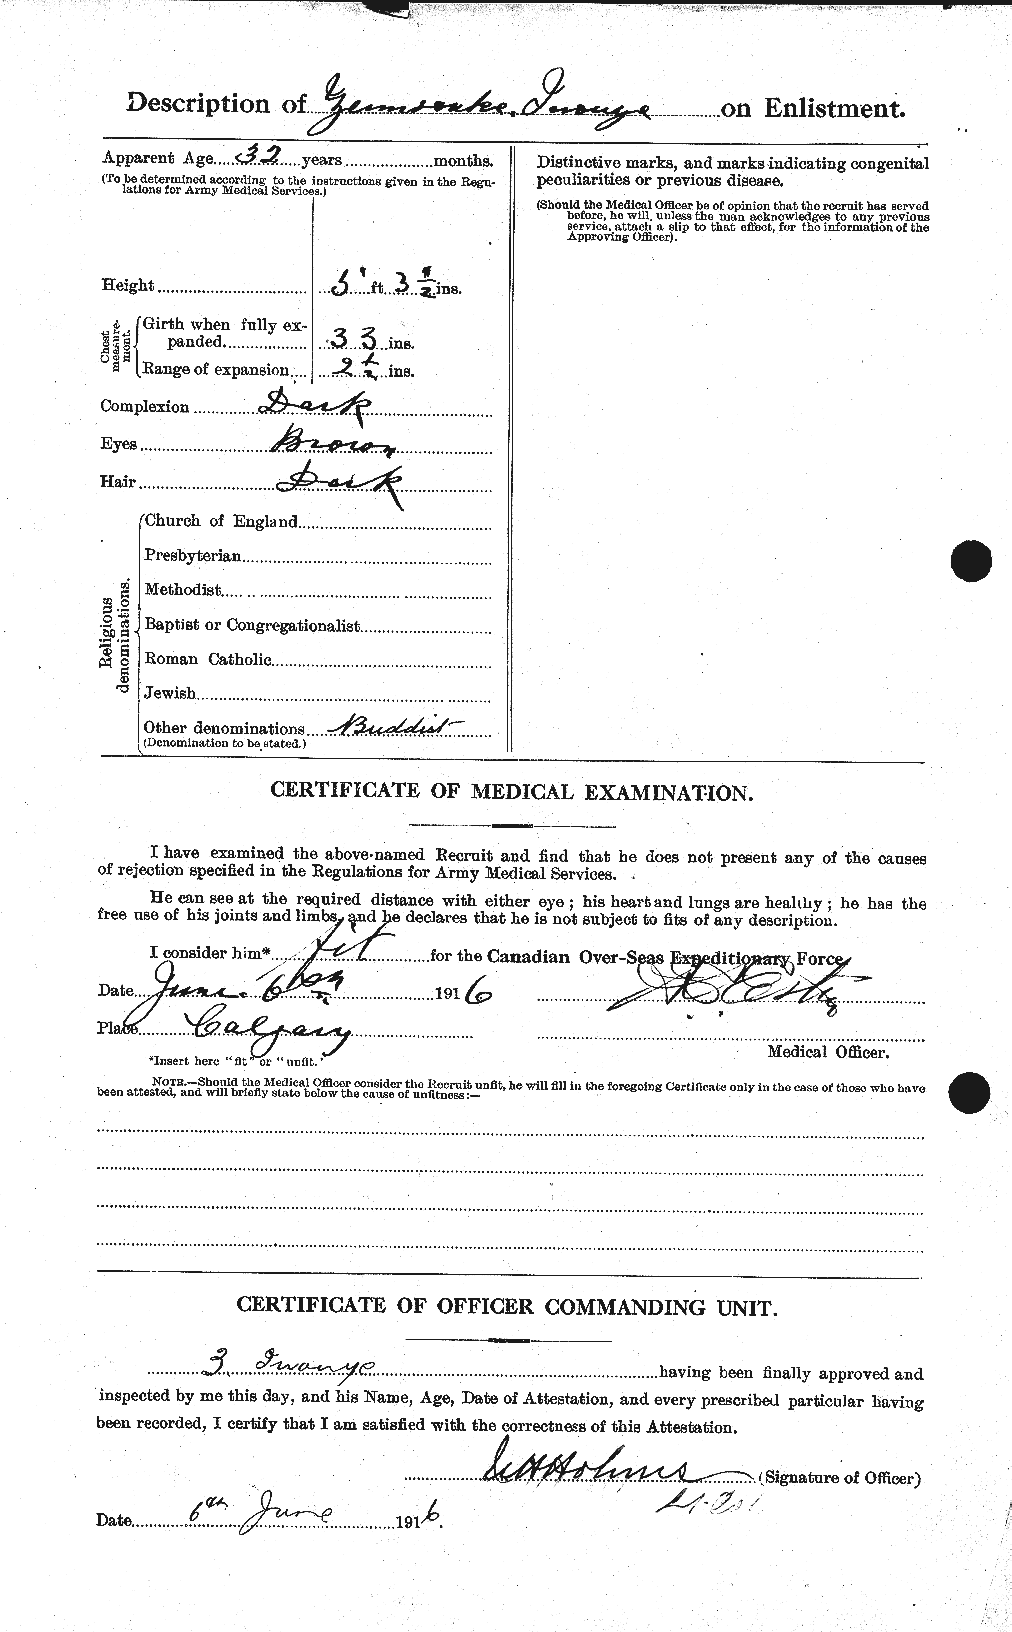 Personnel Records of the First World War - CEF 415498b